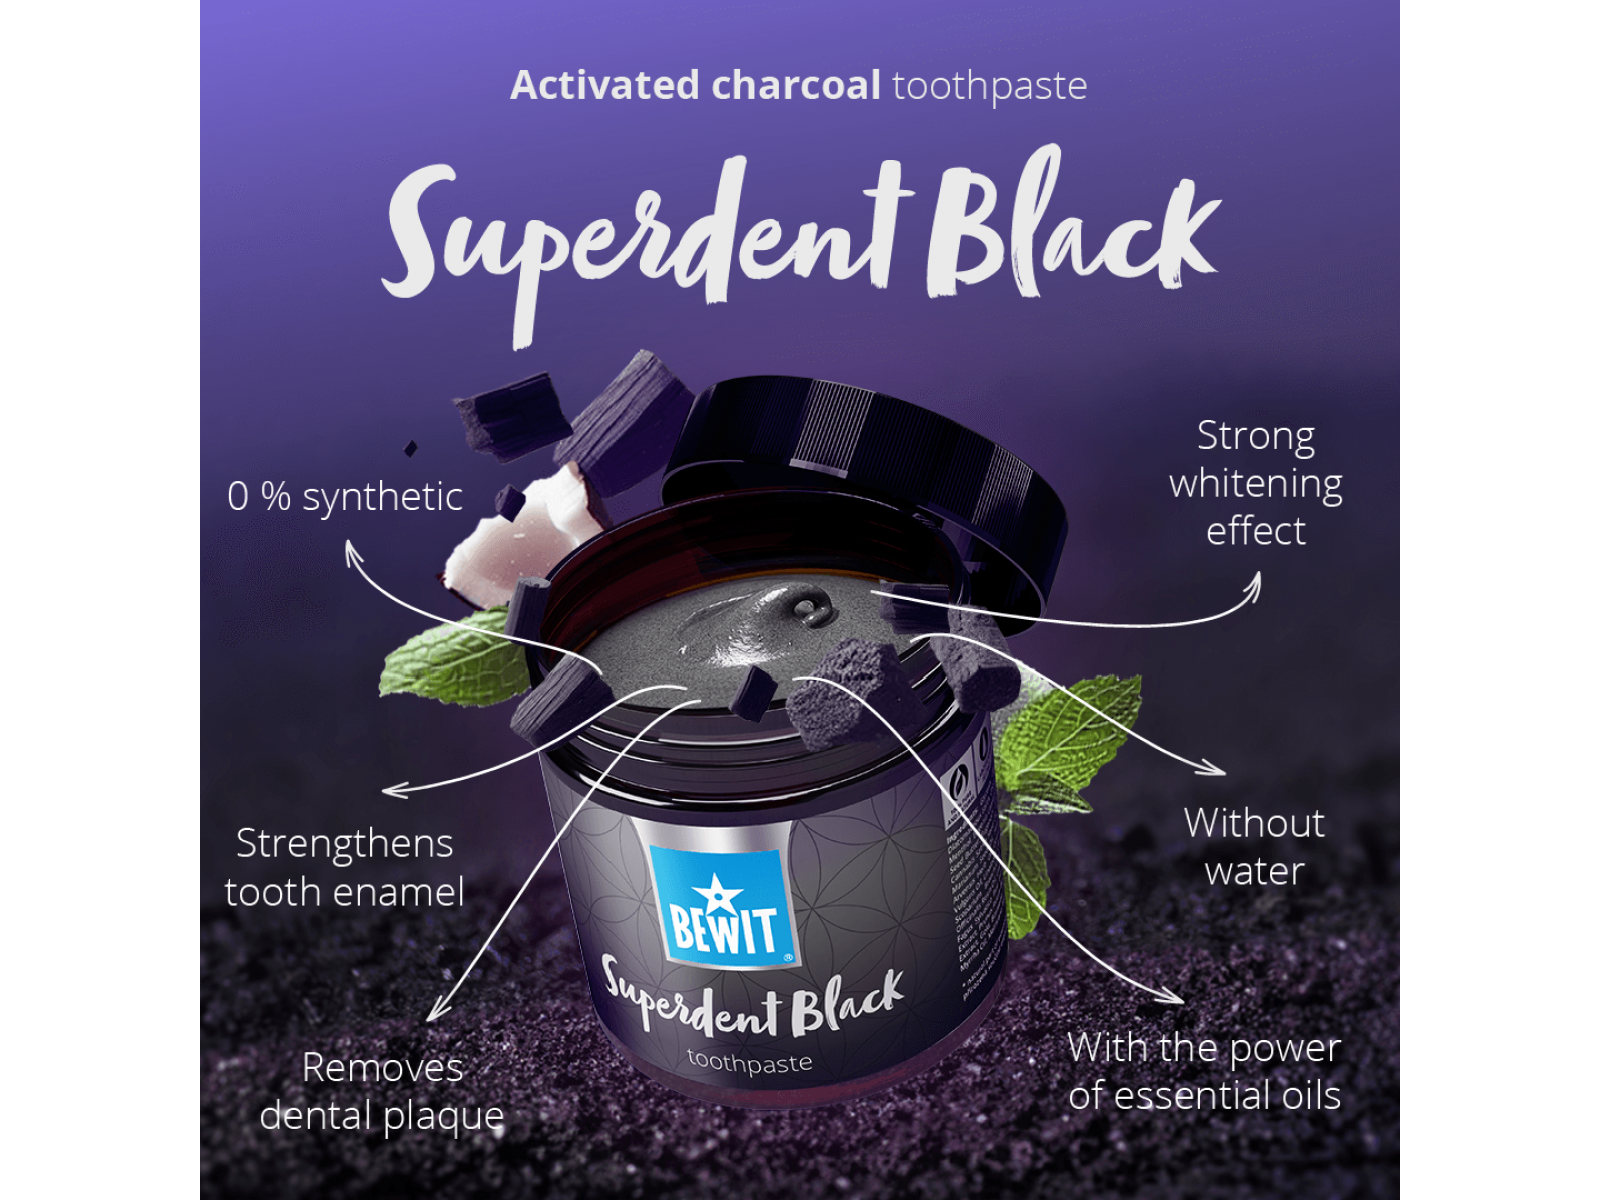 BEWIT Superdent Black - Activated charcoal toothpaste - 6